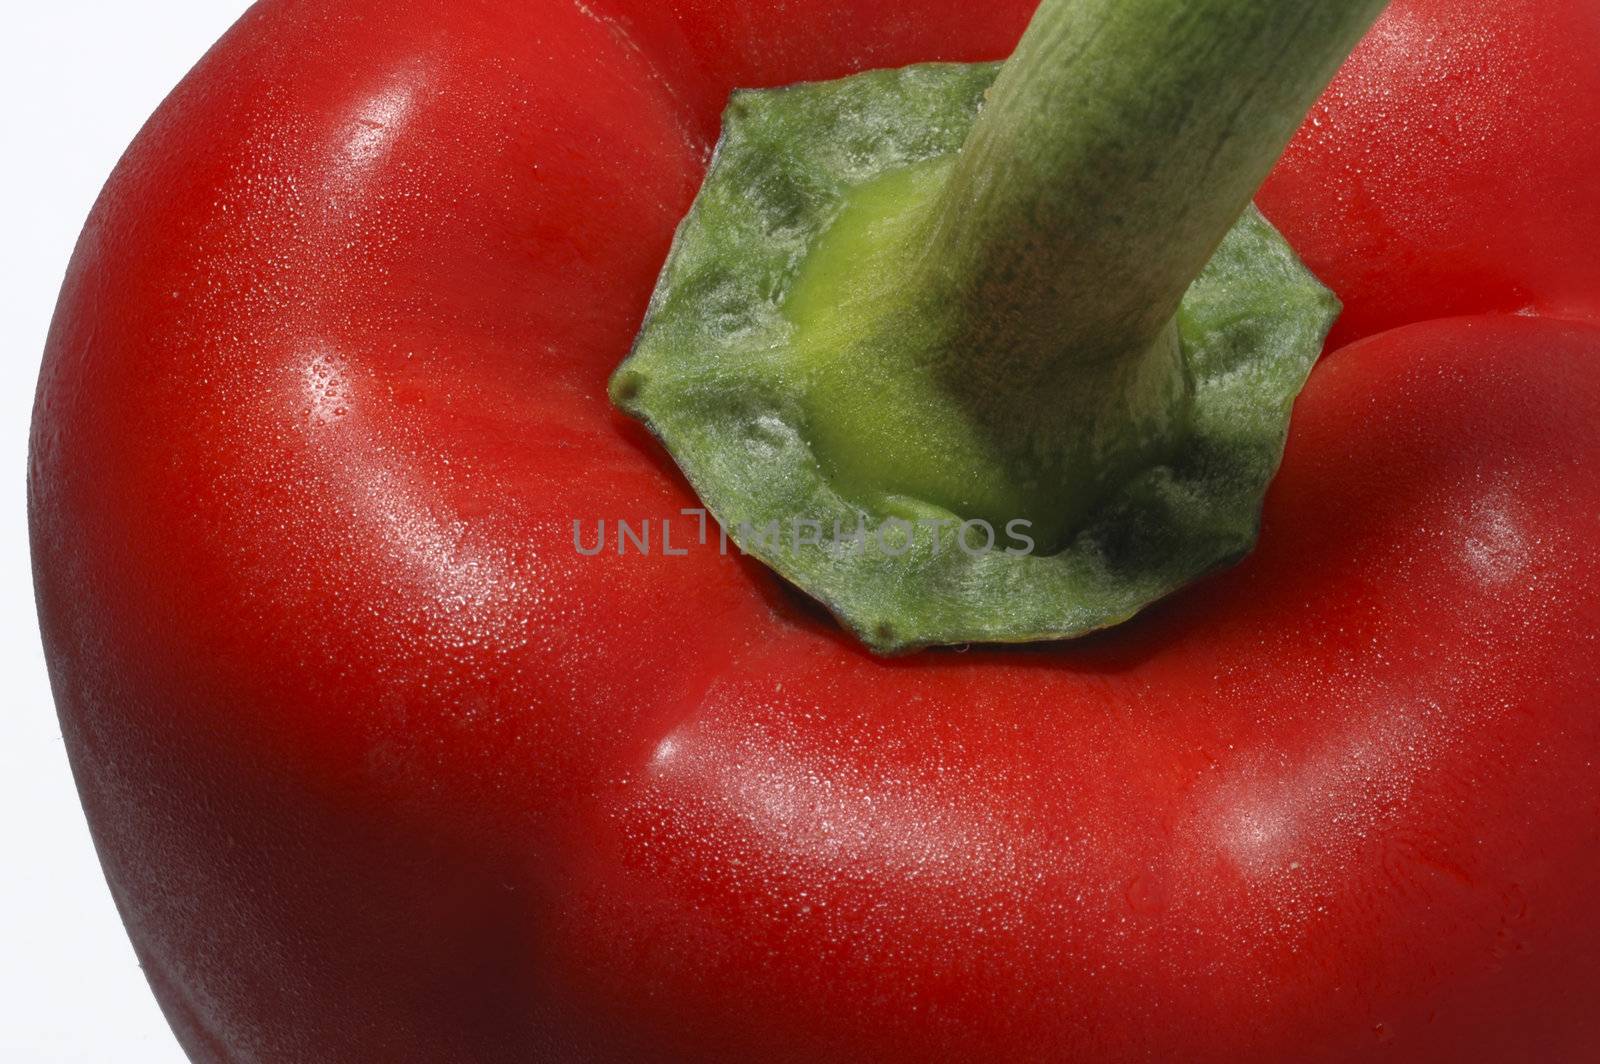 A close up of a red pepper with water mist